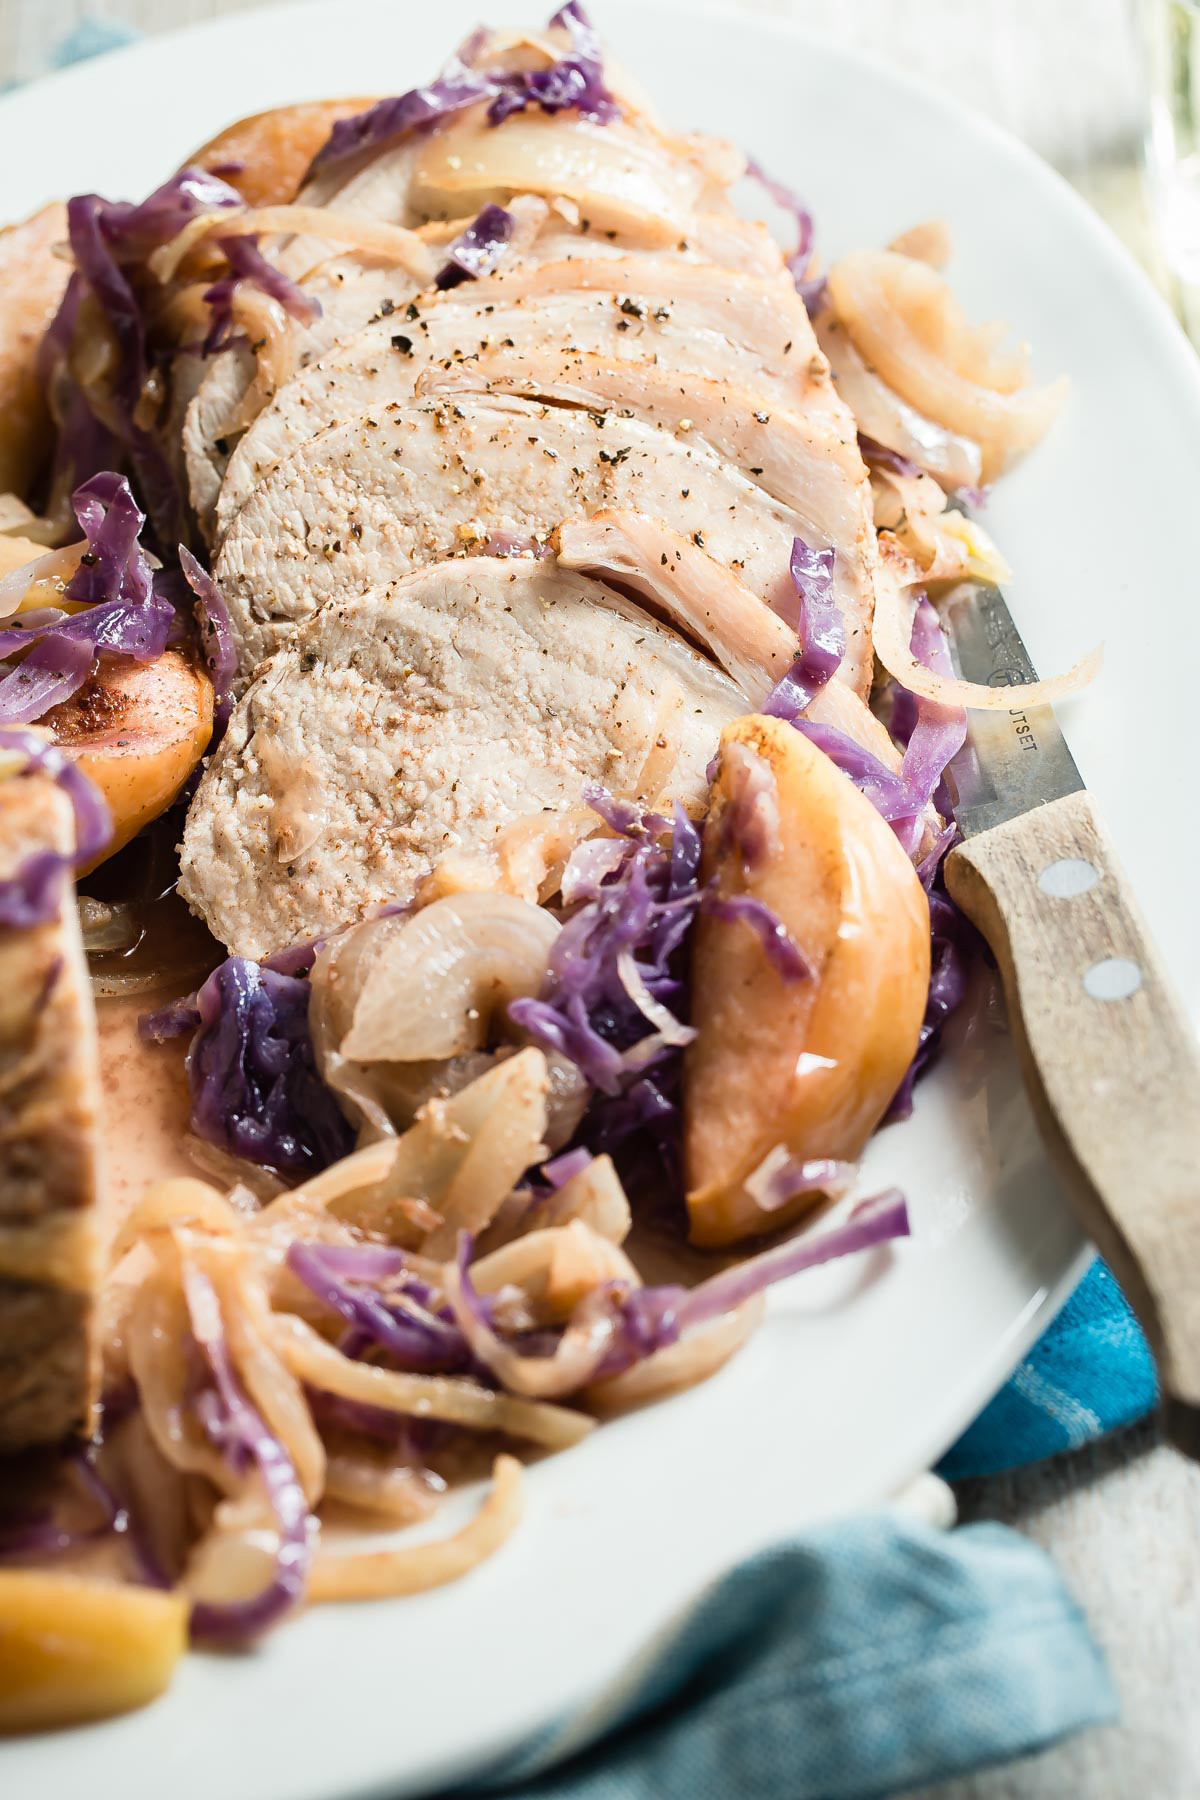 Slow Cooker Pork Tenderloin With Apples And Onions
 Slow Cooker Pork Roast with Apples and ions Pork